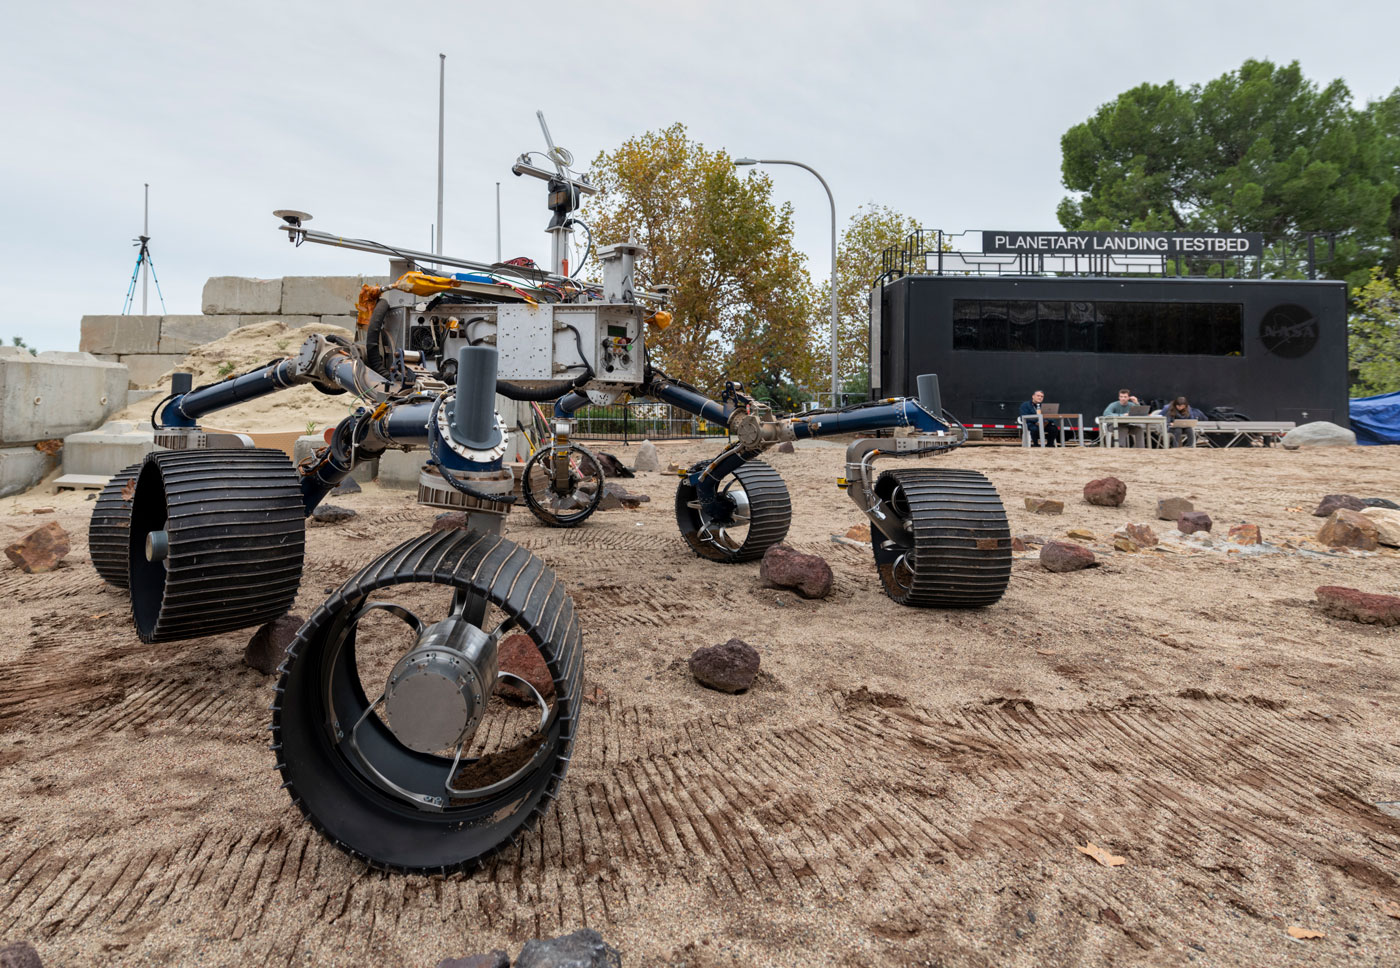 An engineering model of NASA's Mars 2020 rover makes tracks during a driving test in the Mars Yard, an area that simulates Mars-like conditions at NASA's Jet Propulsion Laboratory in Pasadena, California.